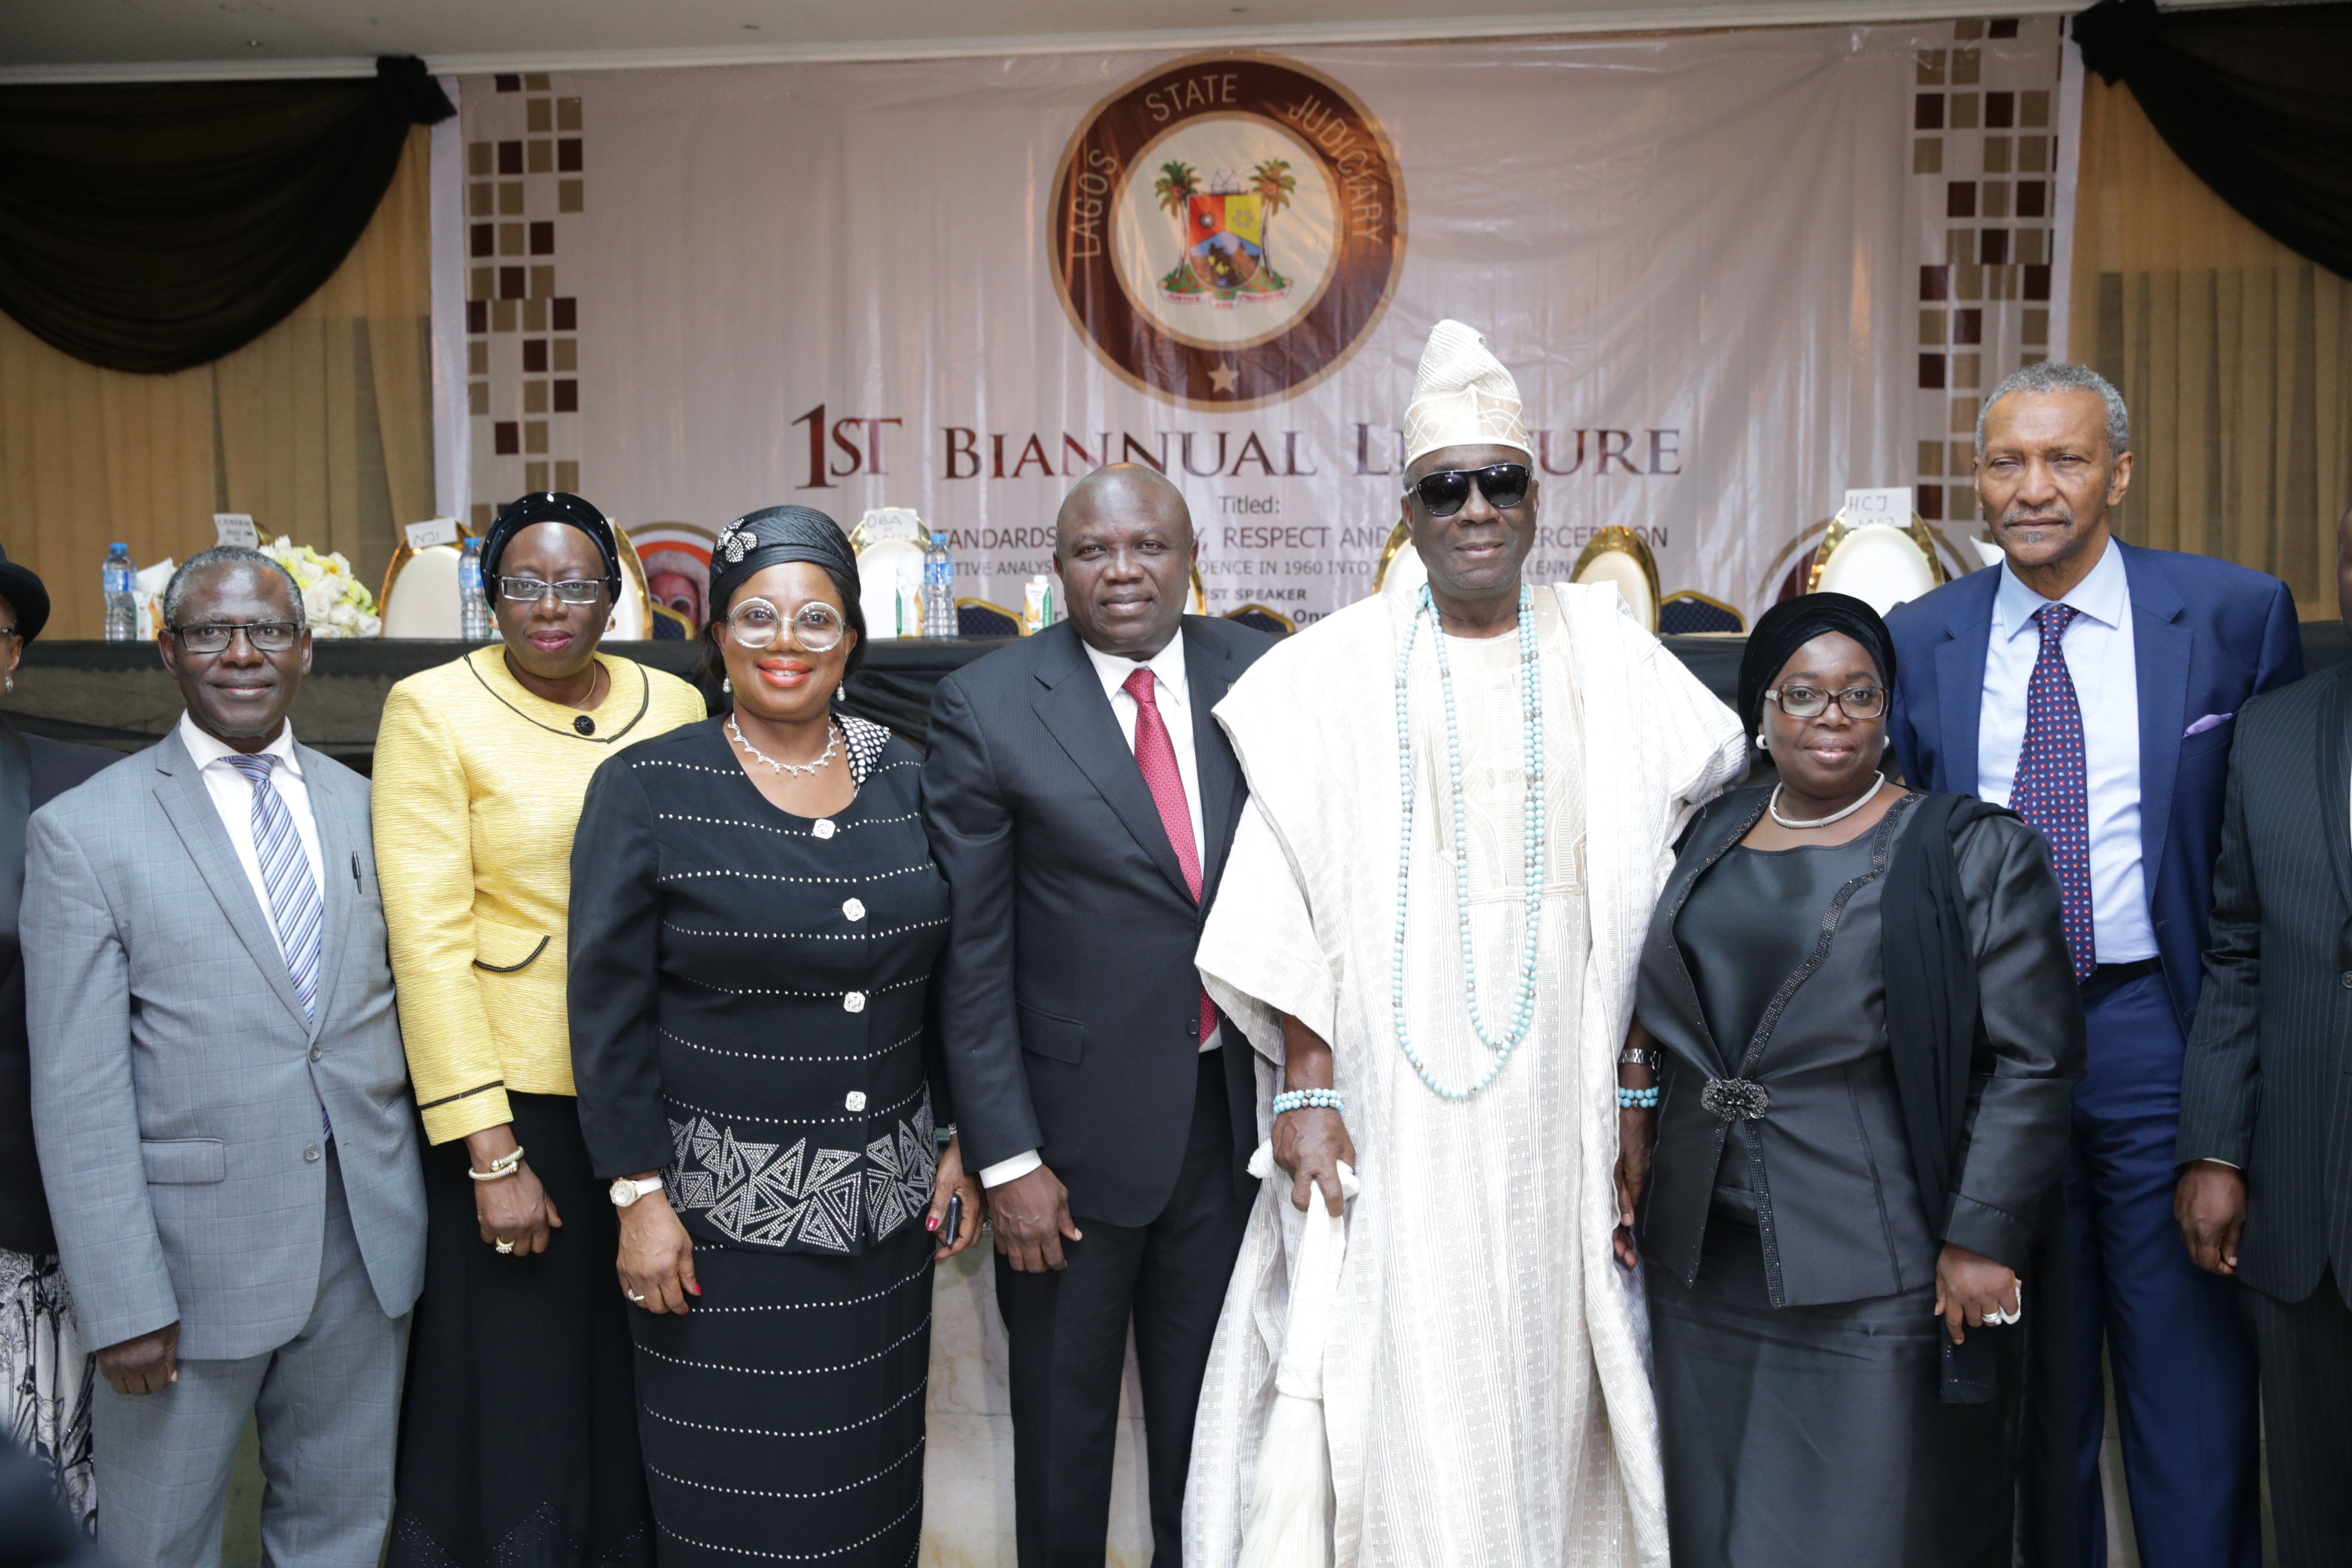 Lagos State Governor, Mr. Akinwunmi Ambode (middle); Lagos State Chief Judge, Justice Opeyemi Oke (3rd left); Justices of the Supreme Court of Nigeria, Justice Kudirat Kekere-Ekun (2nd left); Justice Kumai Bayang Akaahs (left); Oba of Lagos, Oba Rilwan Akiolu I (3rd right); Deputy Governor of Lagos State, Dr. (Mrs) Oluranti Adebule (2nd right) and representative of Chief Justice of Nigeria (CJN), Justice Olabode Rhodes-Vivour (right) during the Lagos State Judiciary first Bi-Annual lecture, at the Lagos City Hall, Lagos Island, on Monday, May 14, 2018.